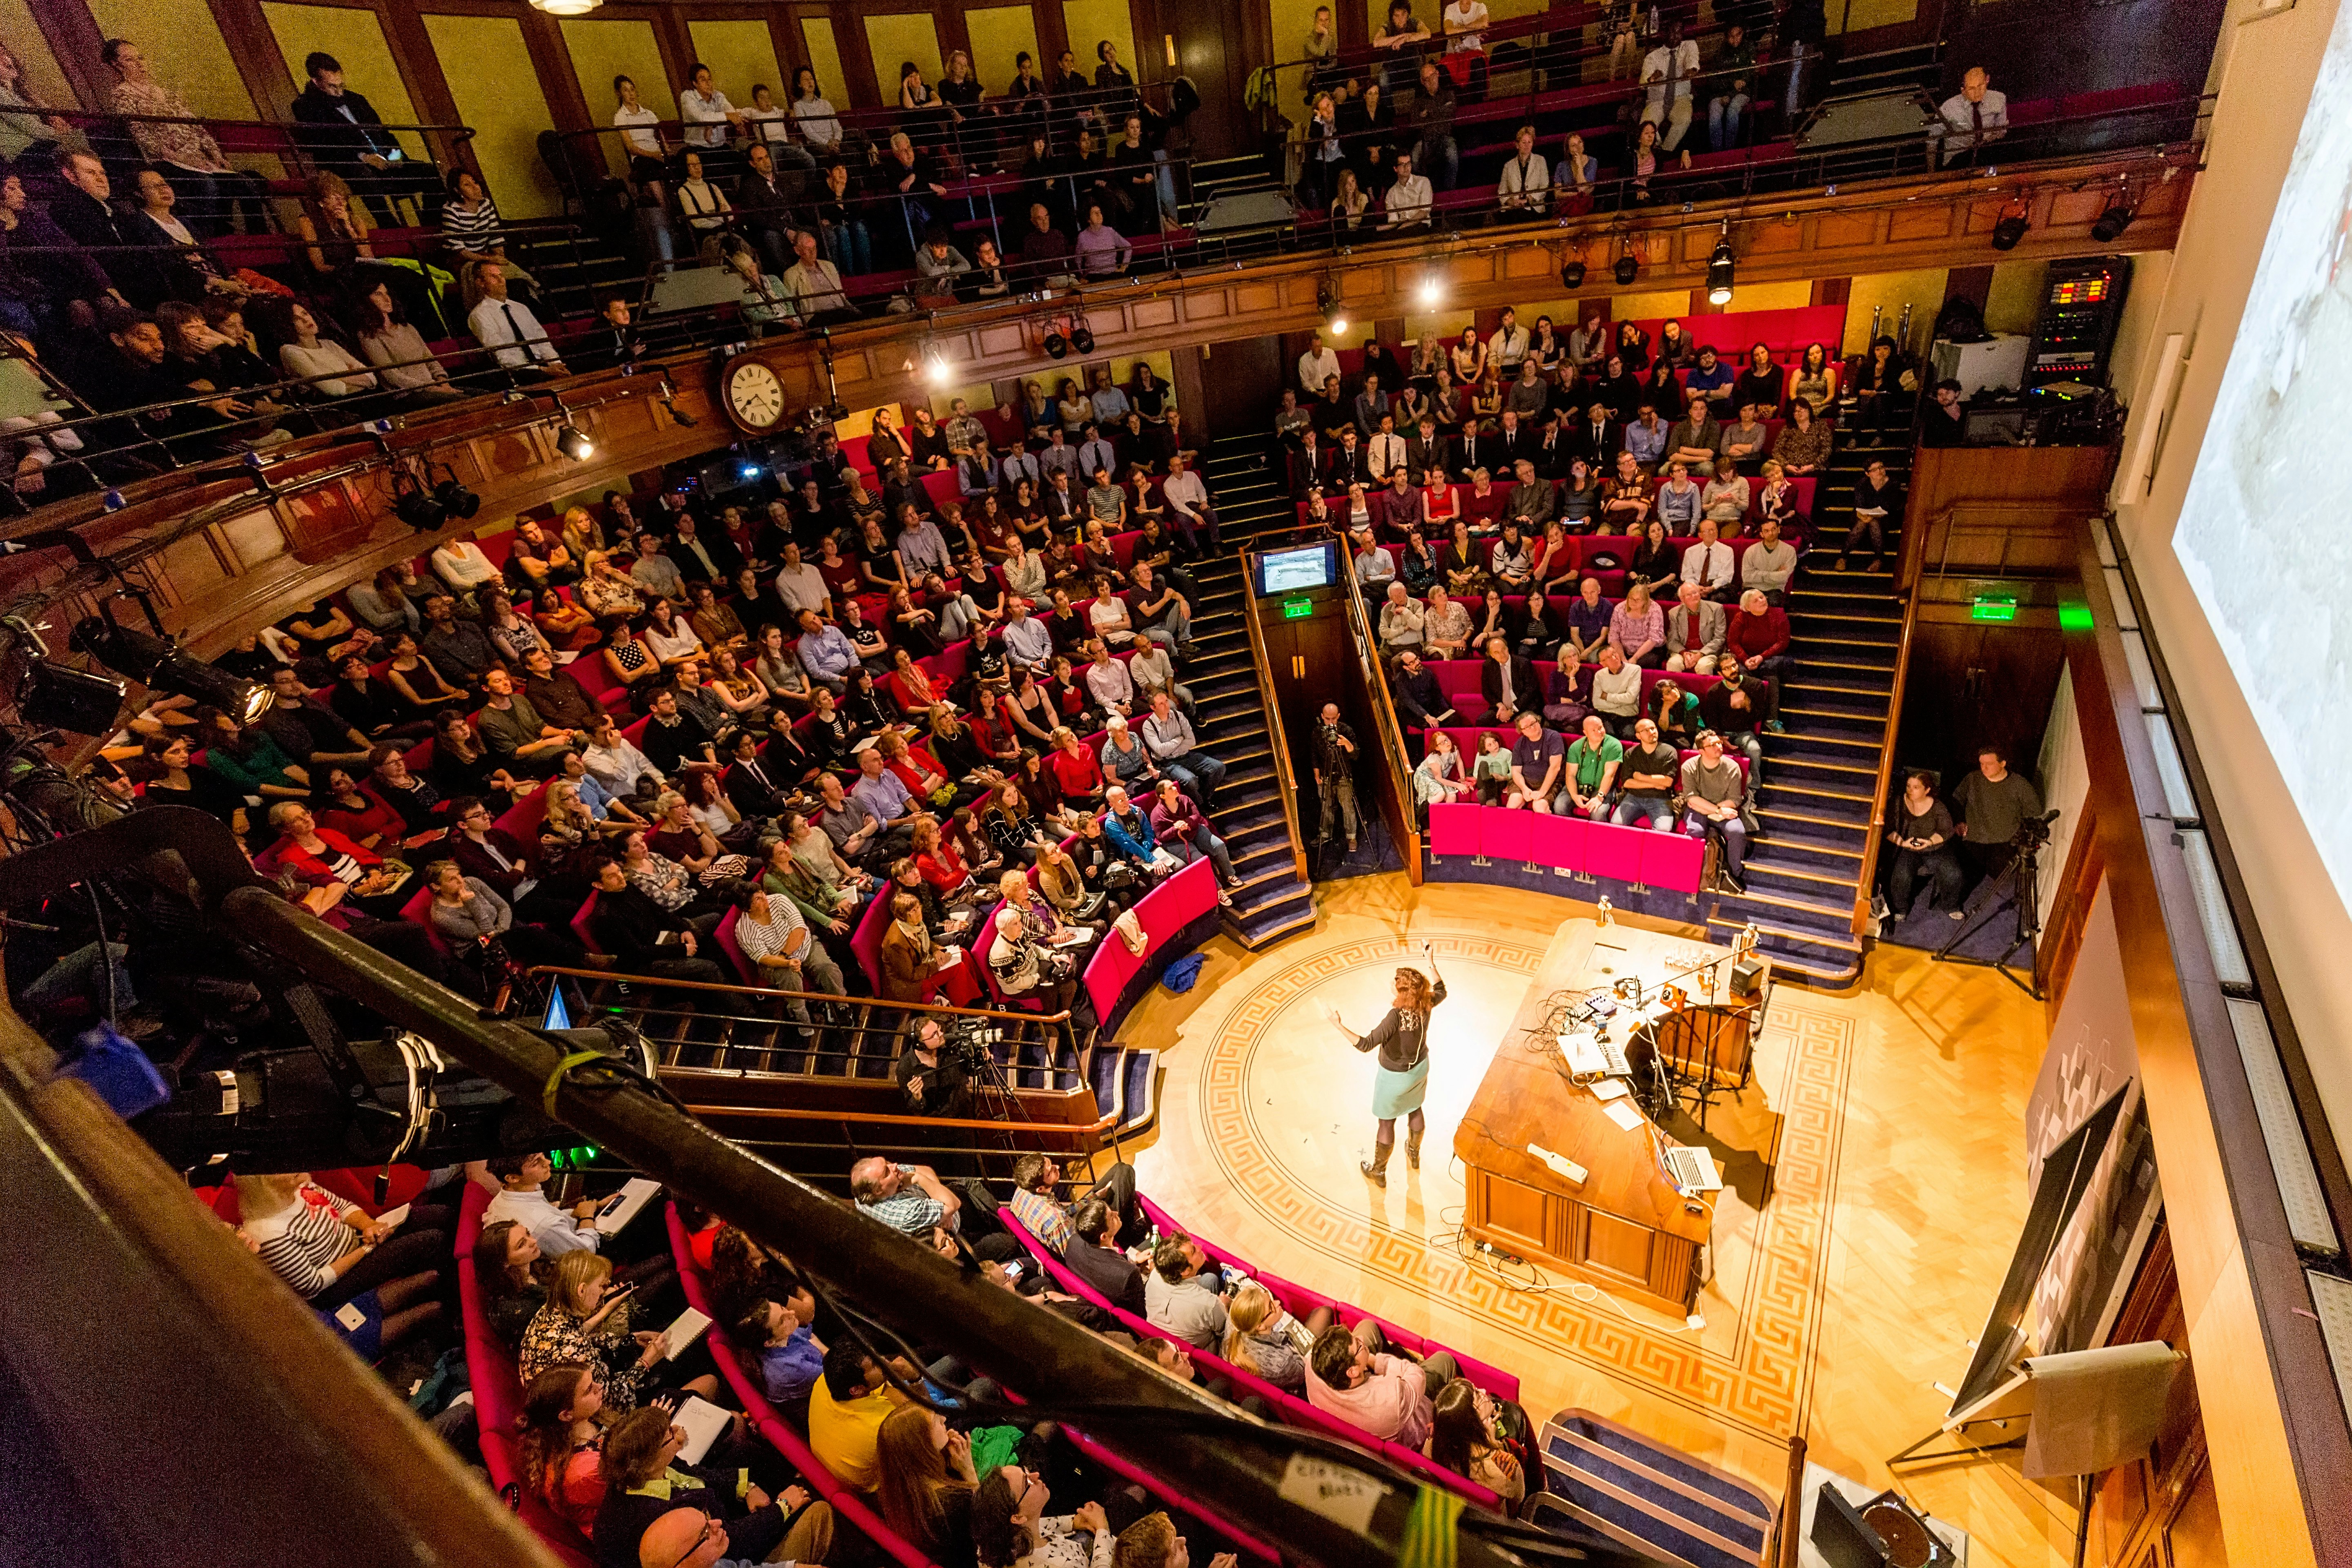 Theatres Venues in London - Royal Institution Venue